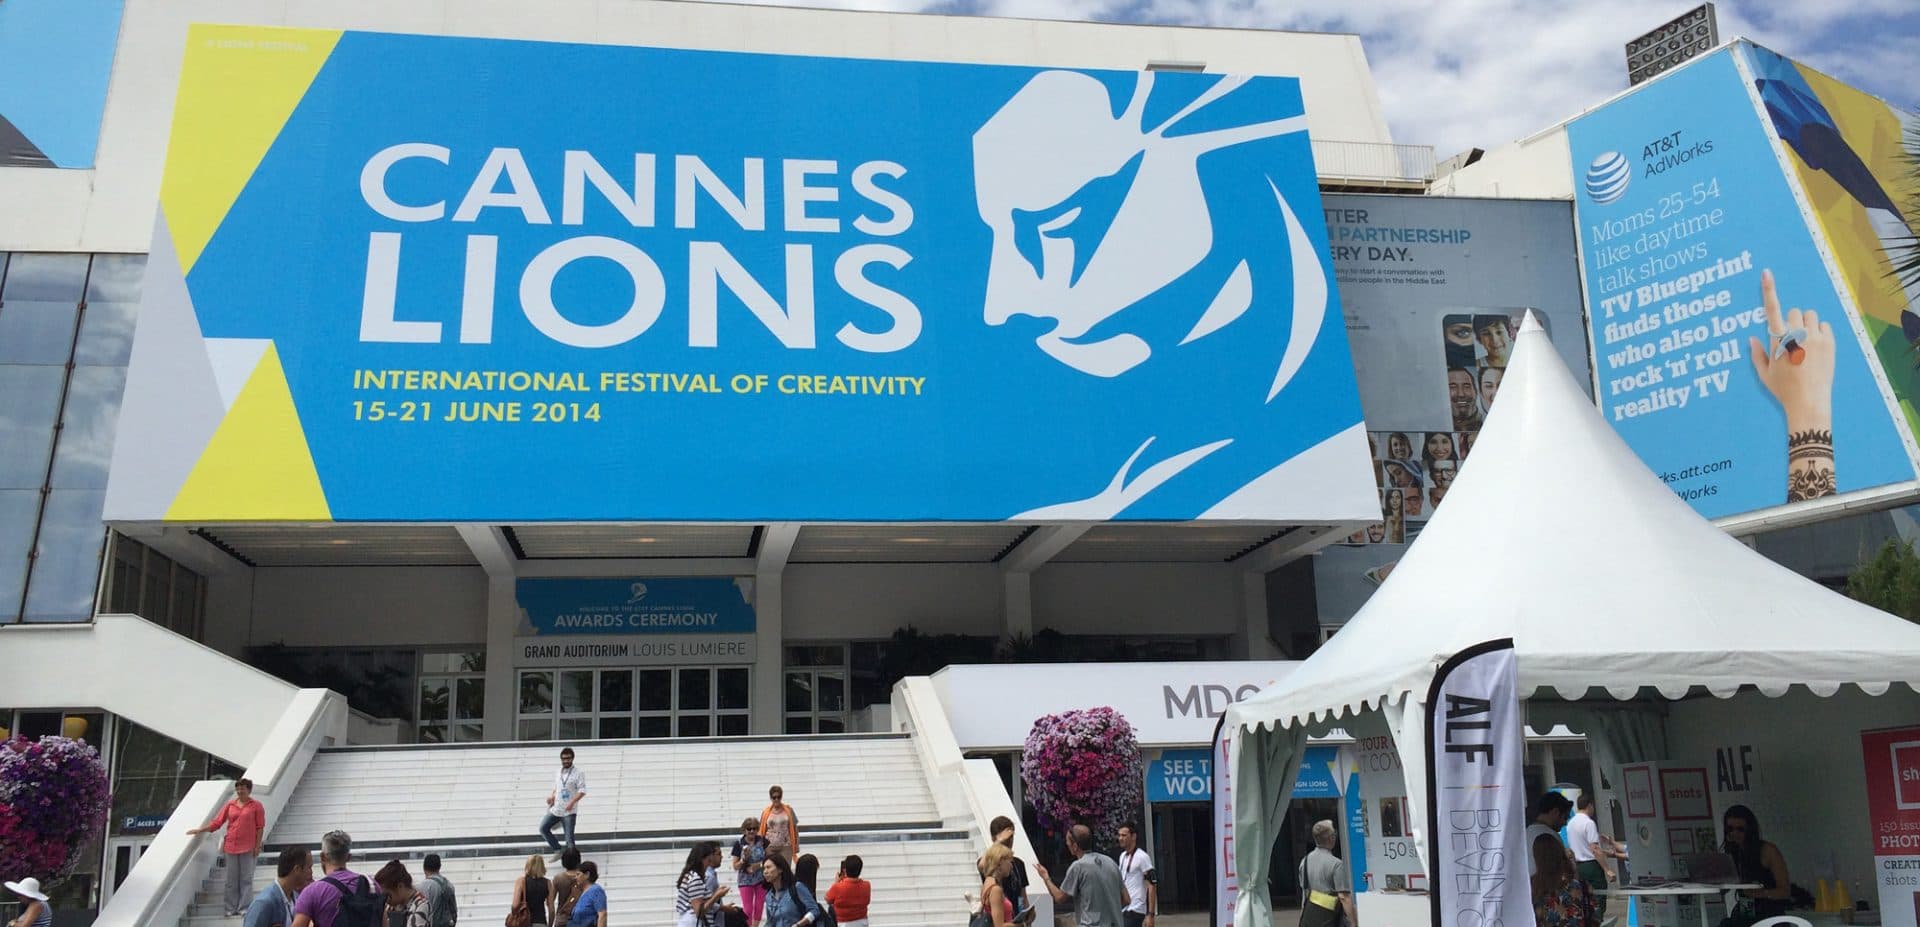 Weber Shandwick Wins Gold, Silver and Bronze PR Lions at 2014 Cannes Lions International Festival of Creativity